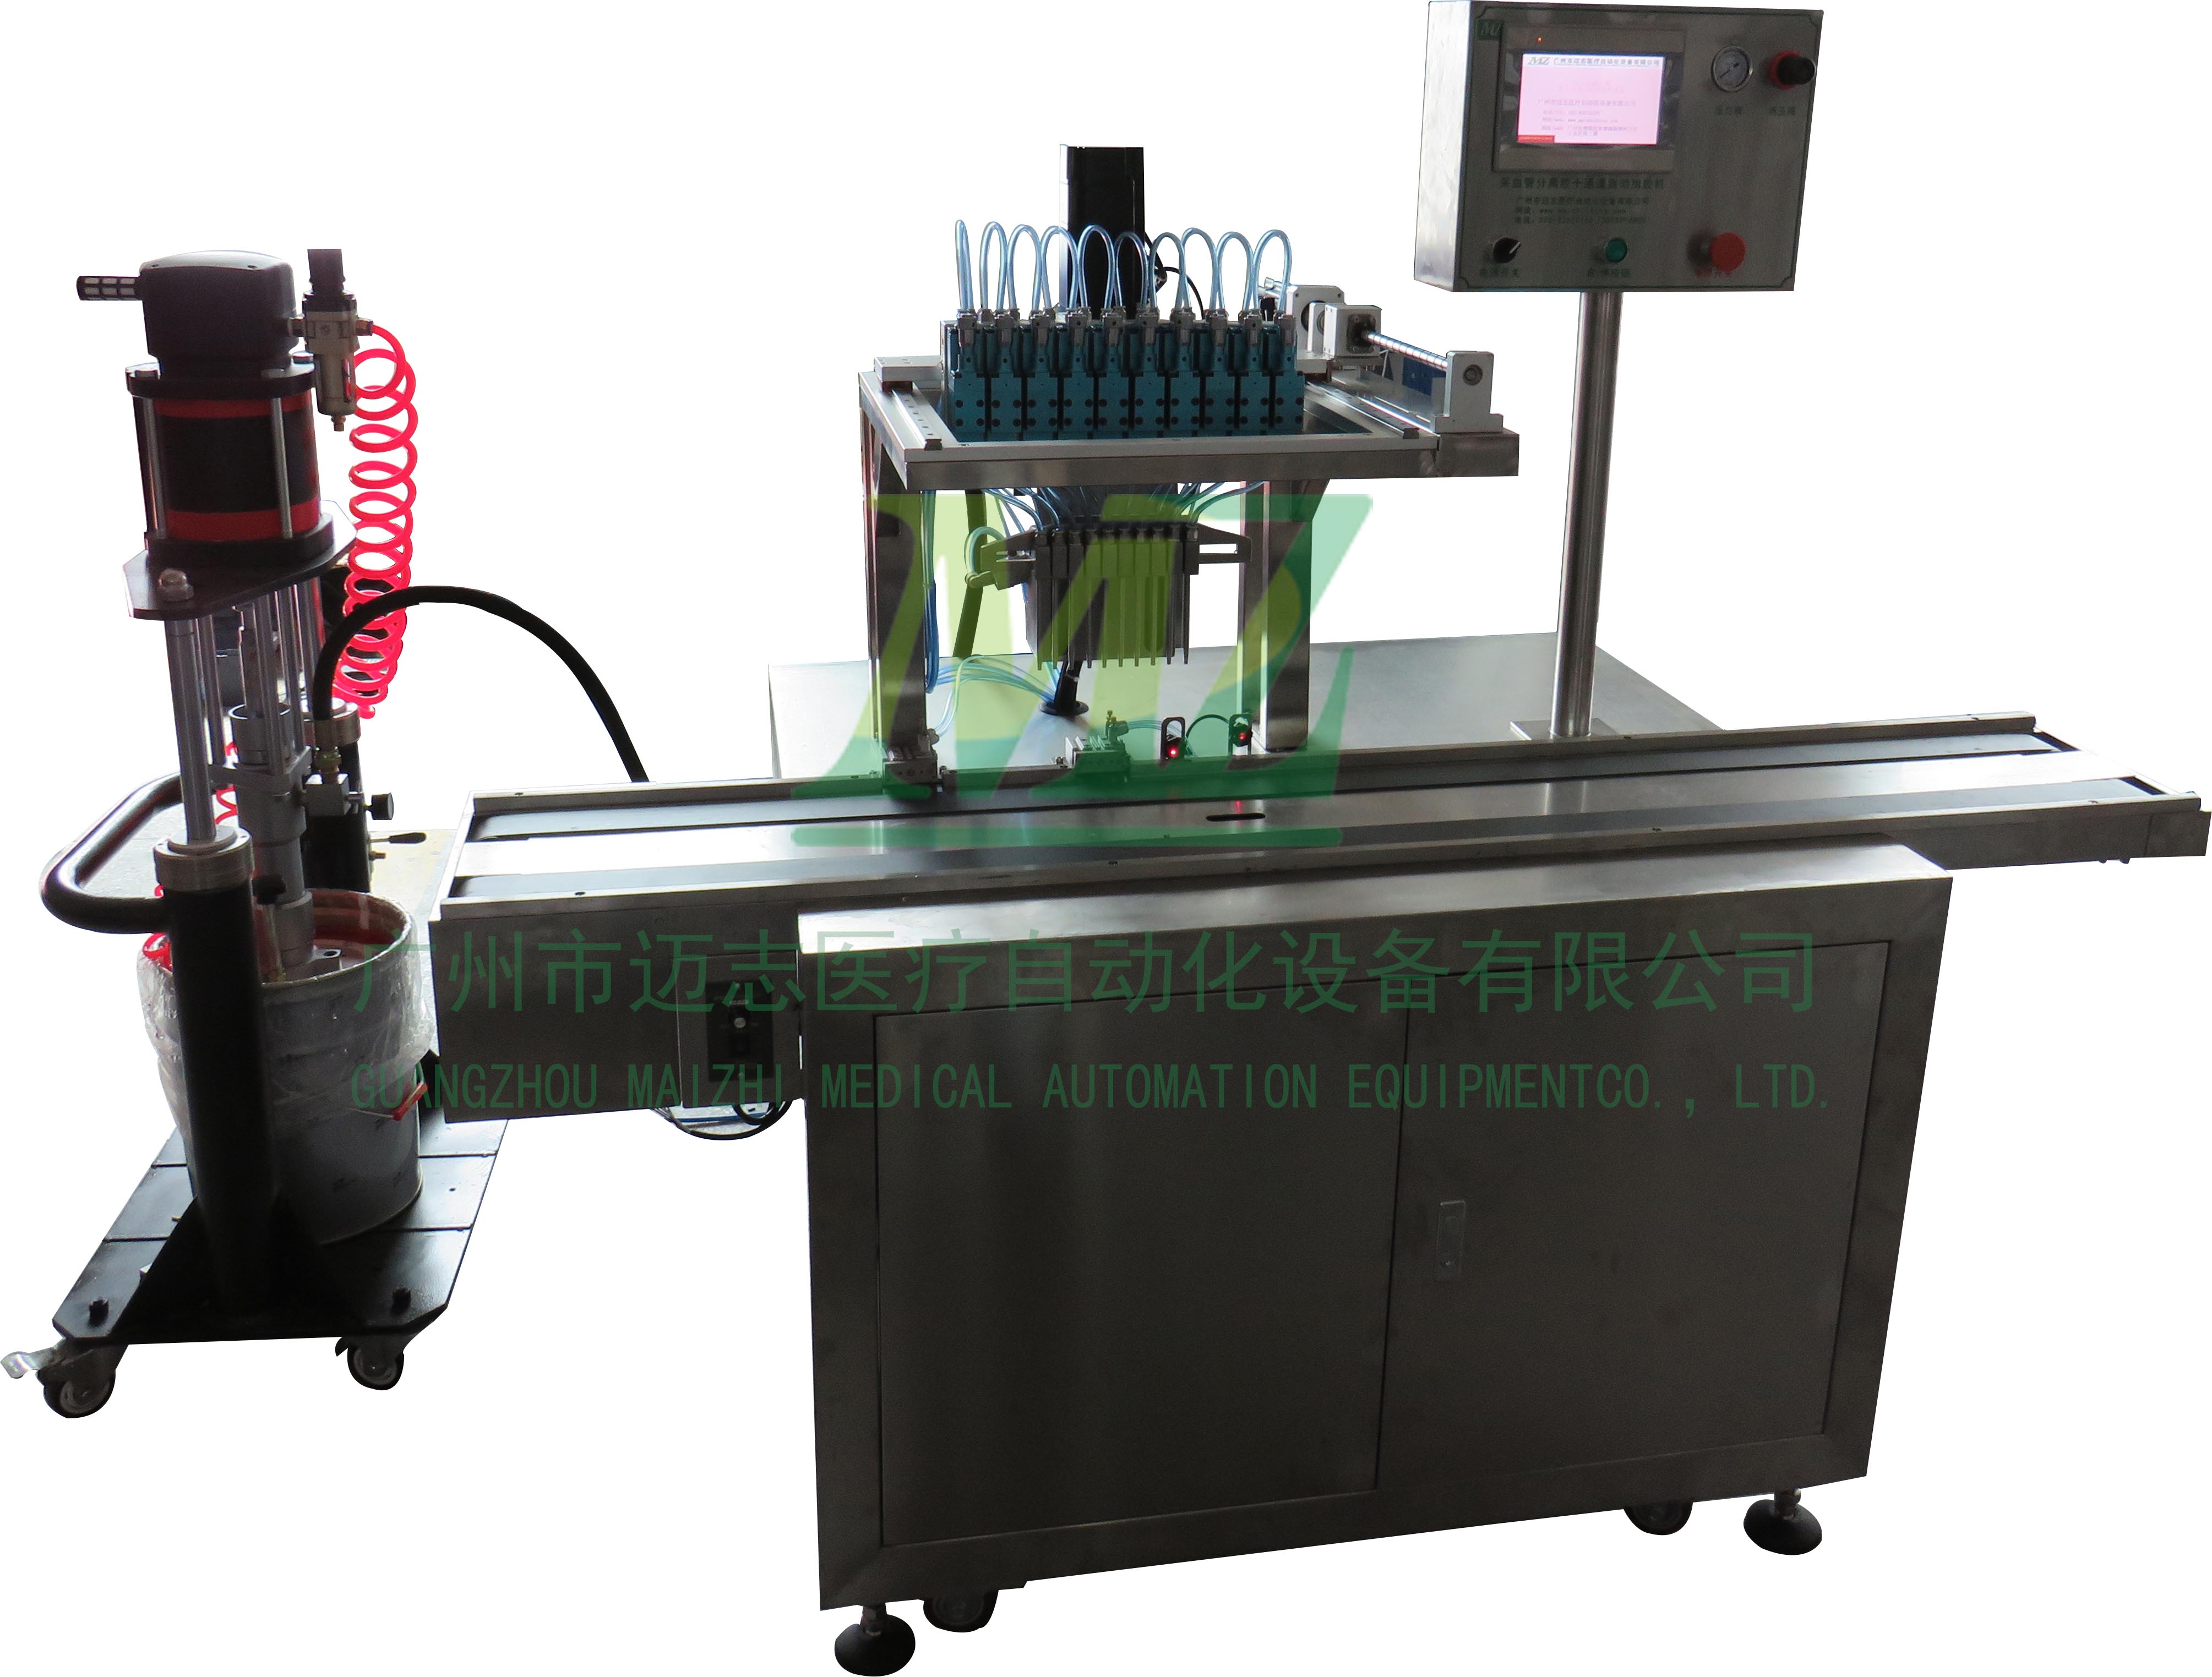 10-Channel Gel Filling Machine of Vacuum Blood Collection Tube